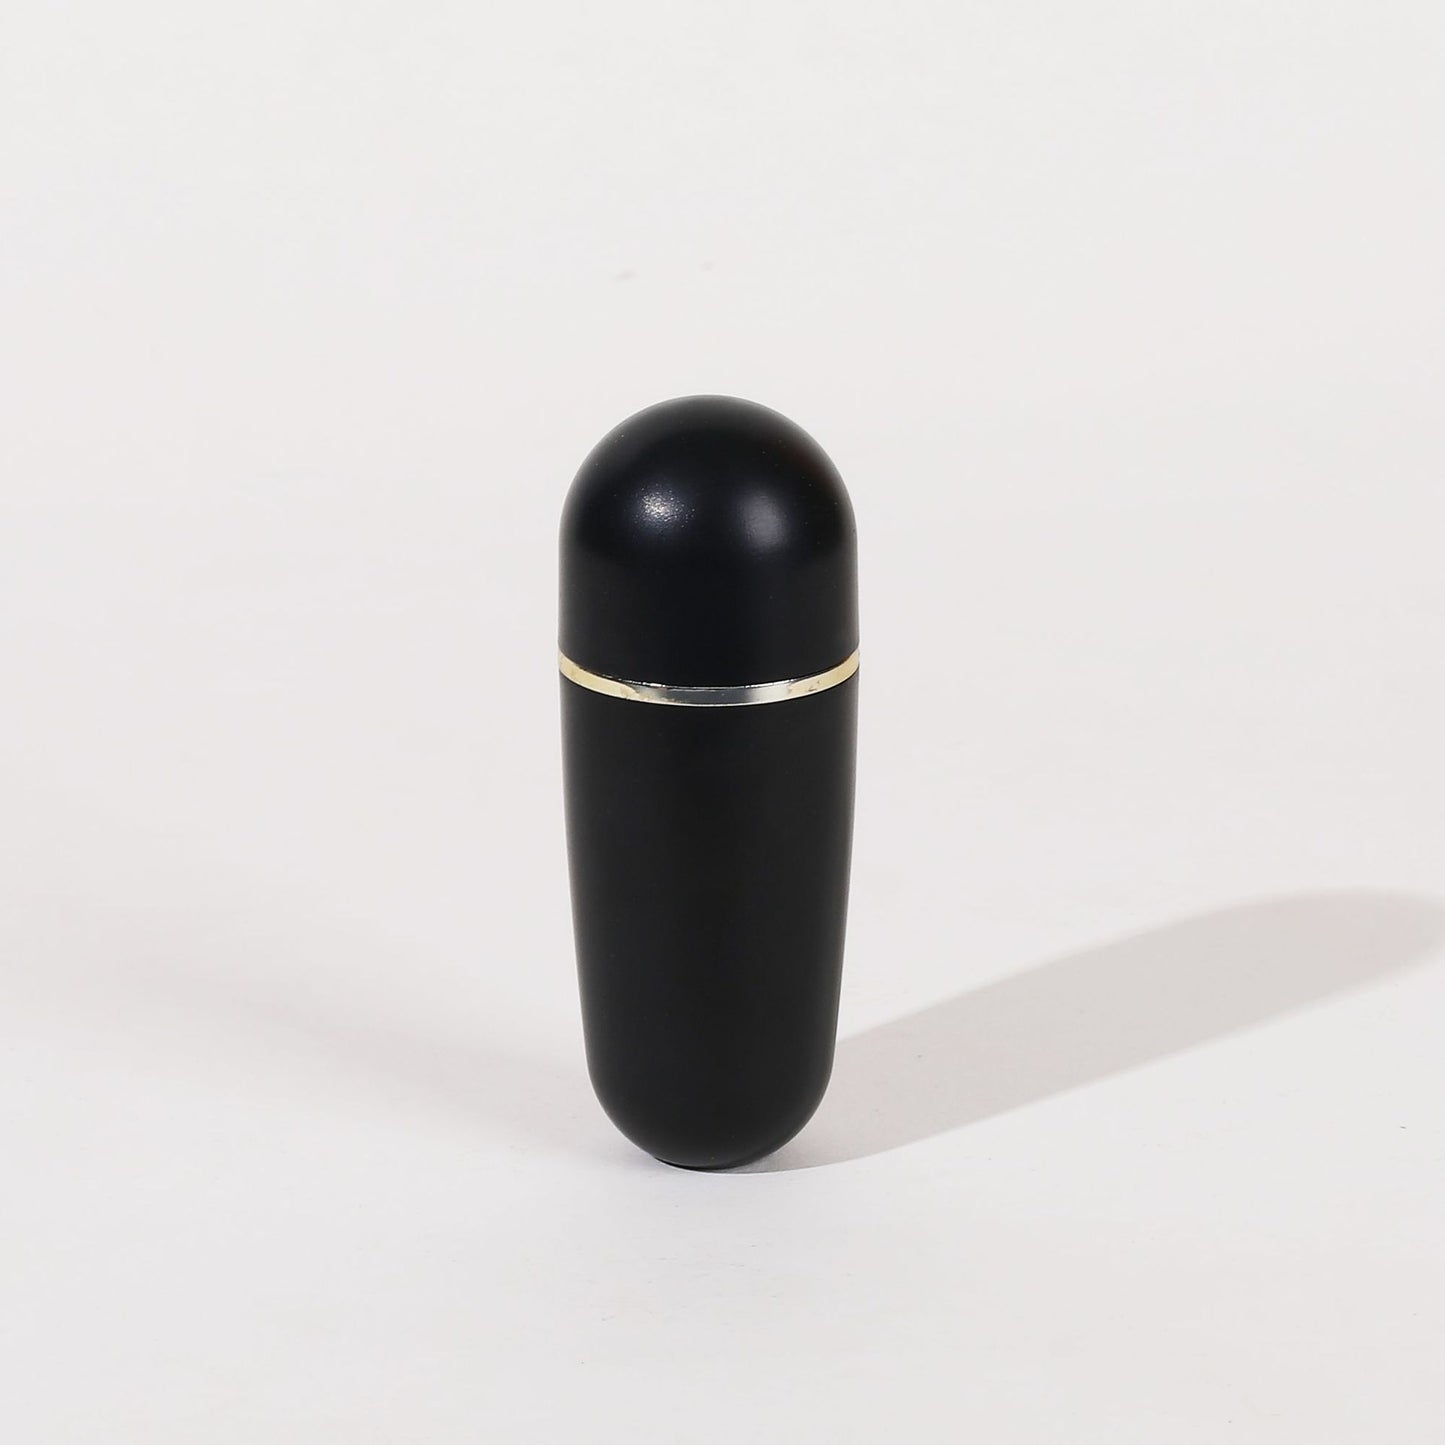 Volcanic Stone Oil Absorbing Rollerball Pore Minimising Beauty Stick Portable